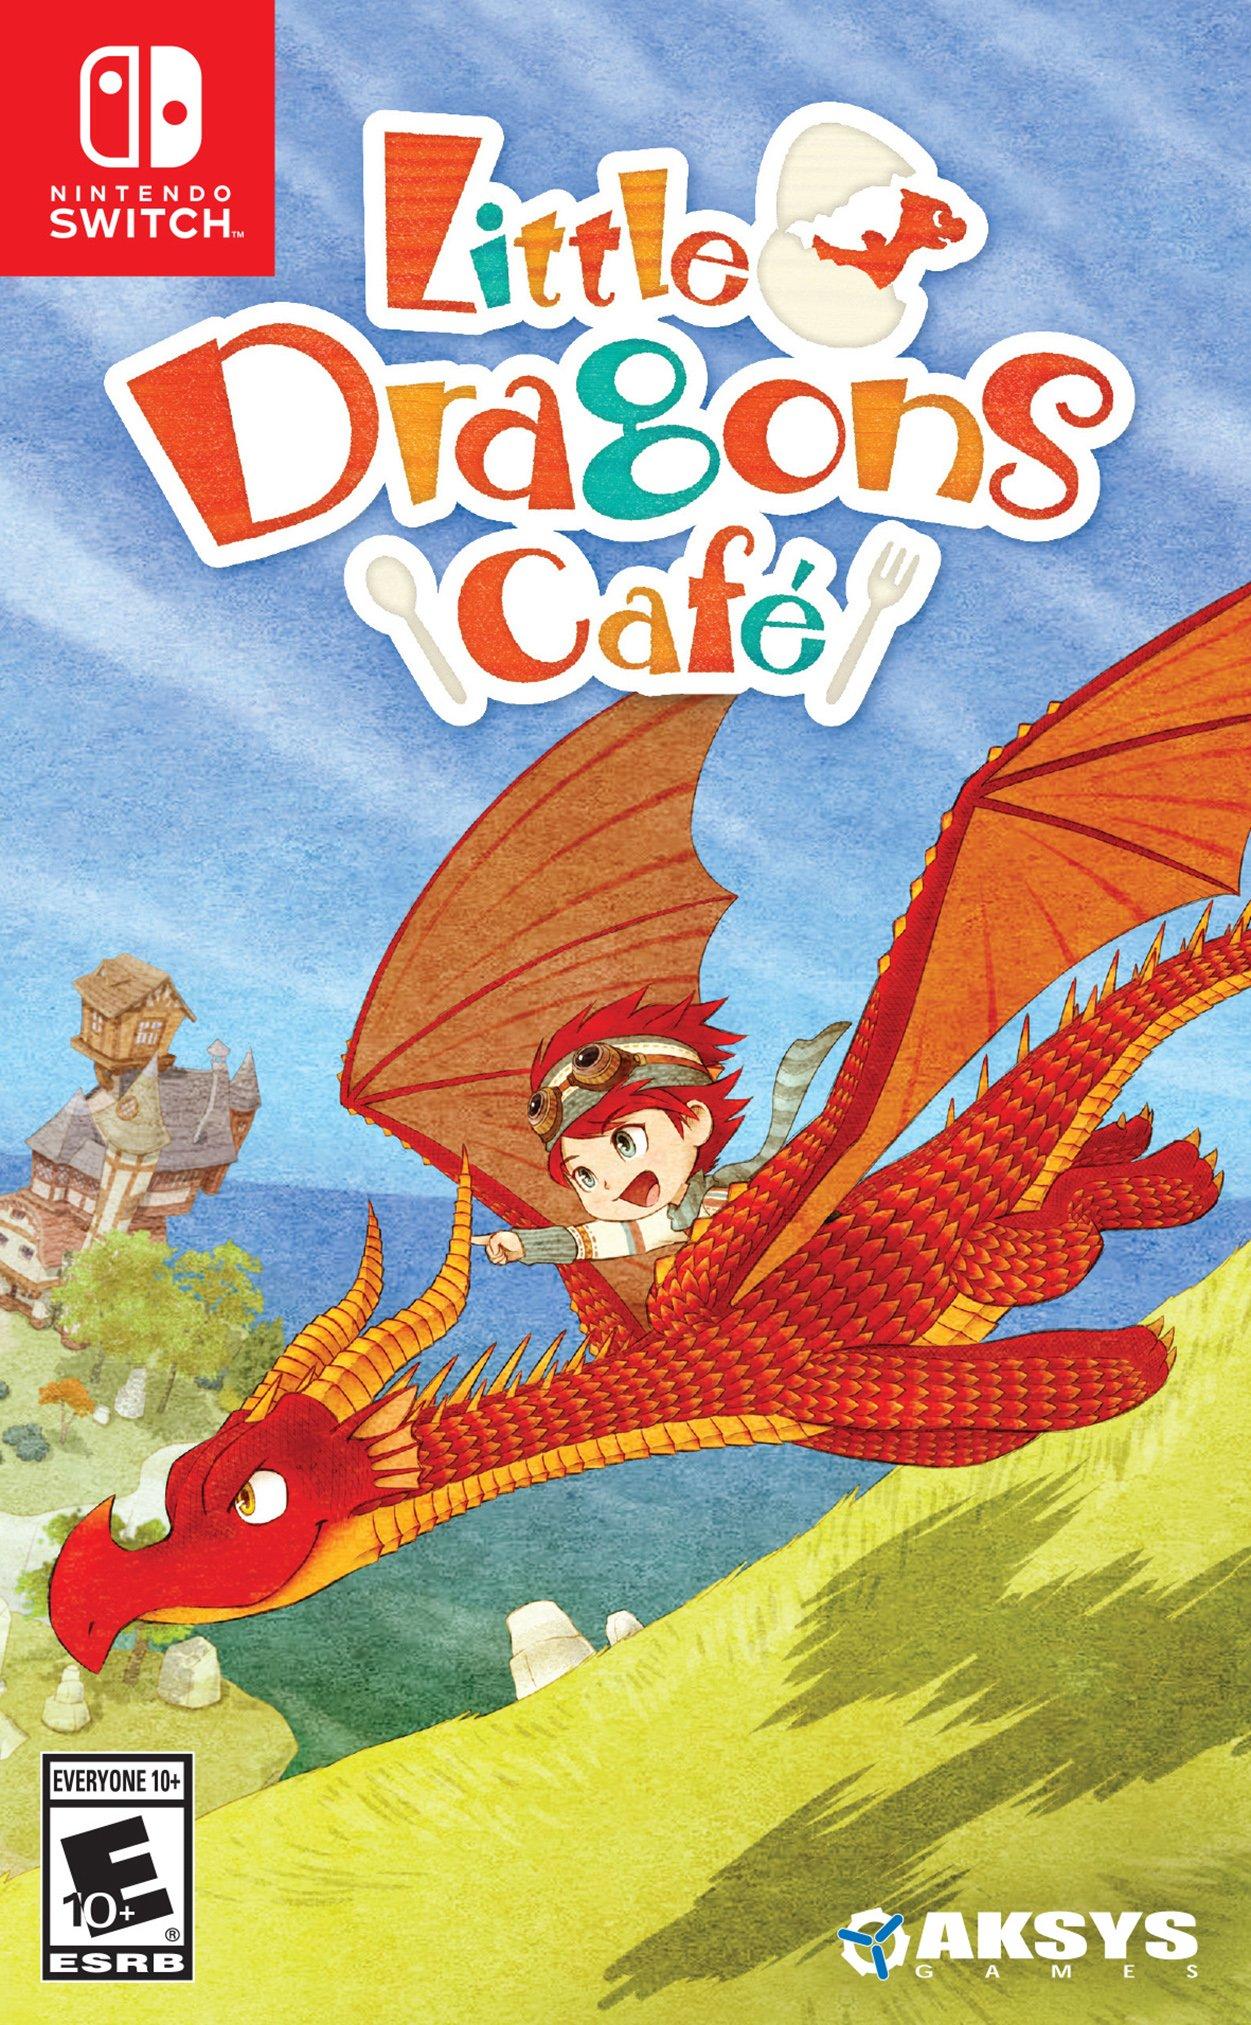 dragon games for nintendo switch